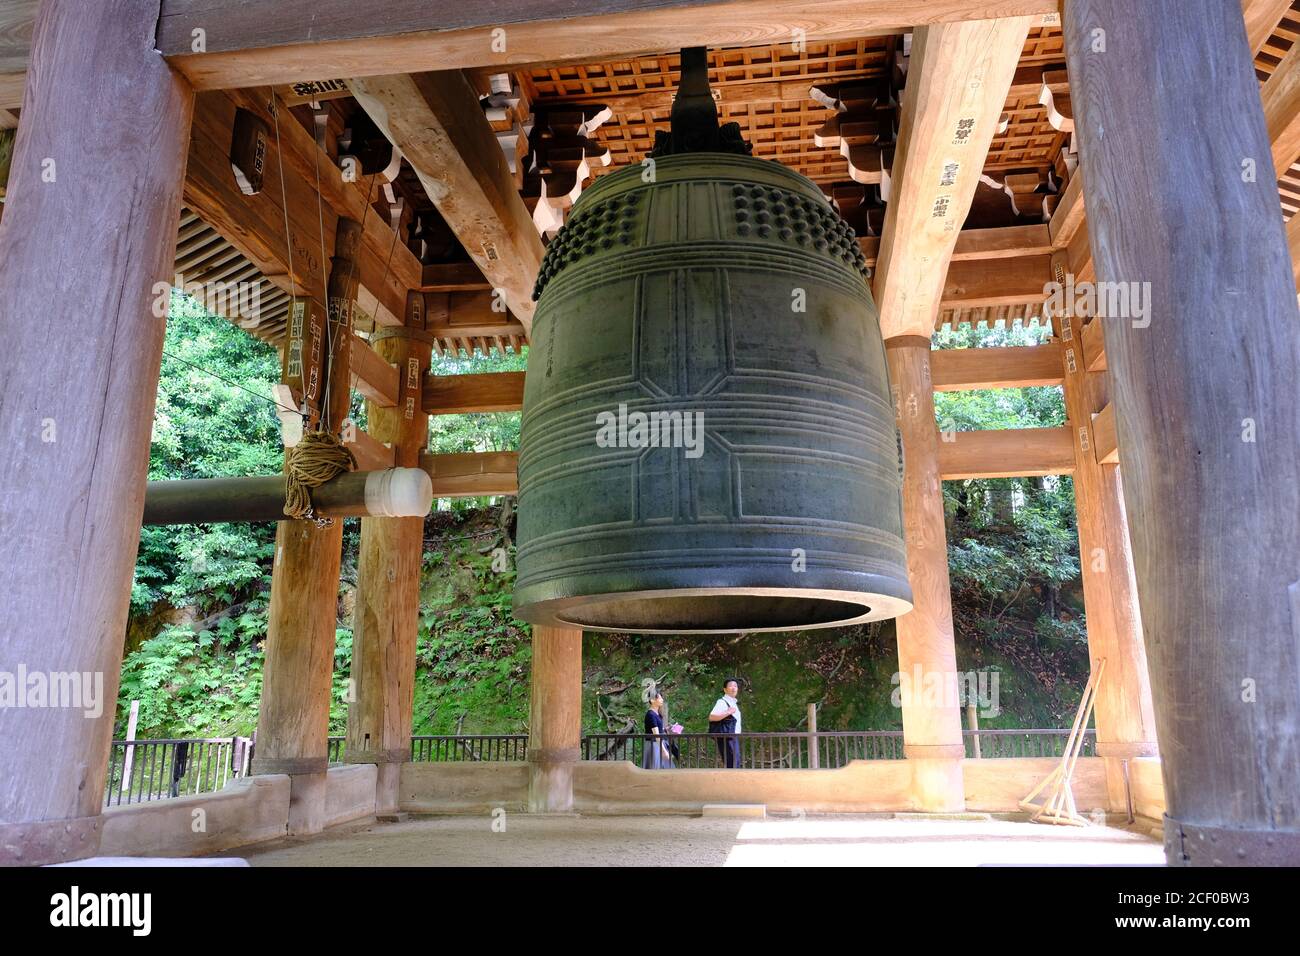 Kyoto Japan - Grand bell at Chion-in temple Stock Photo